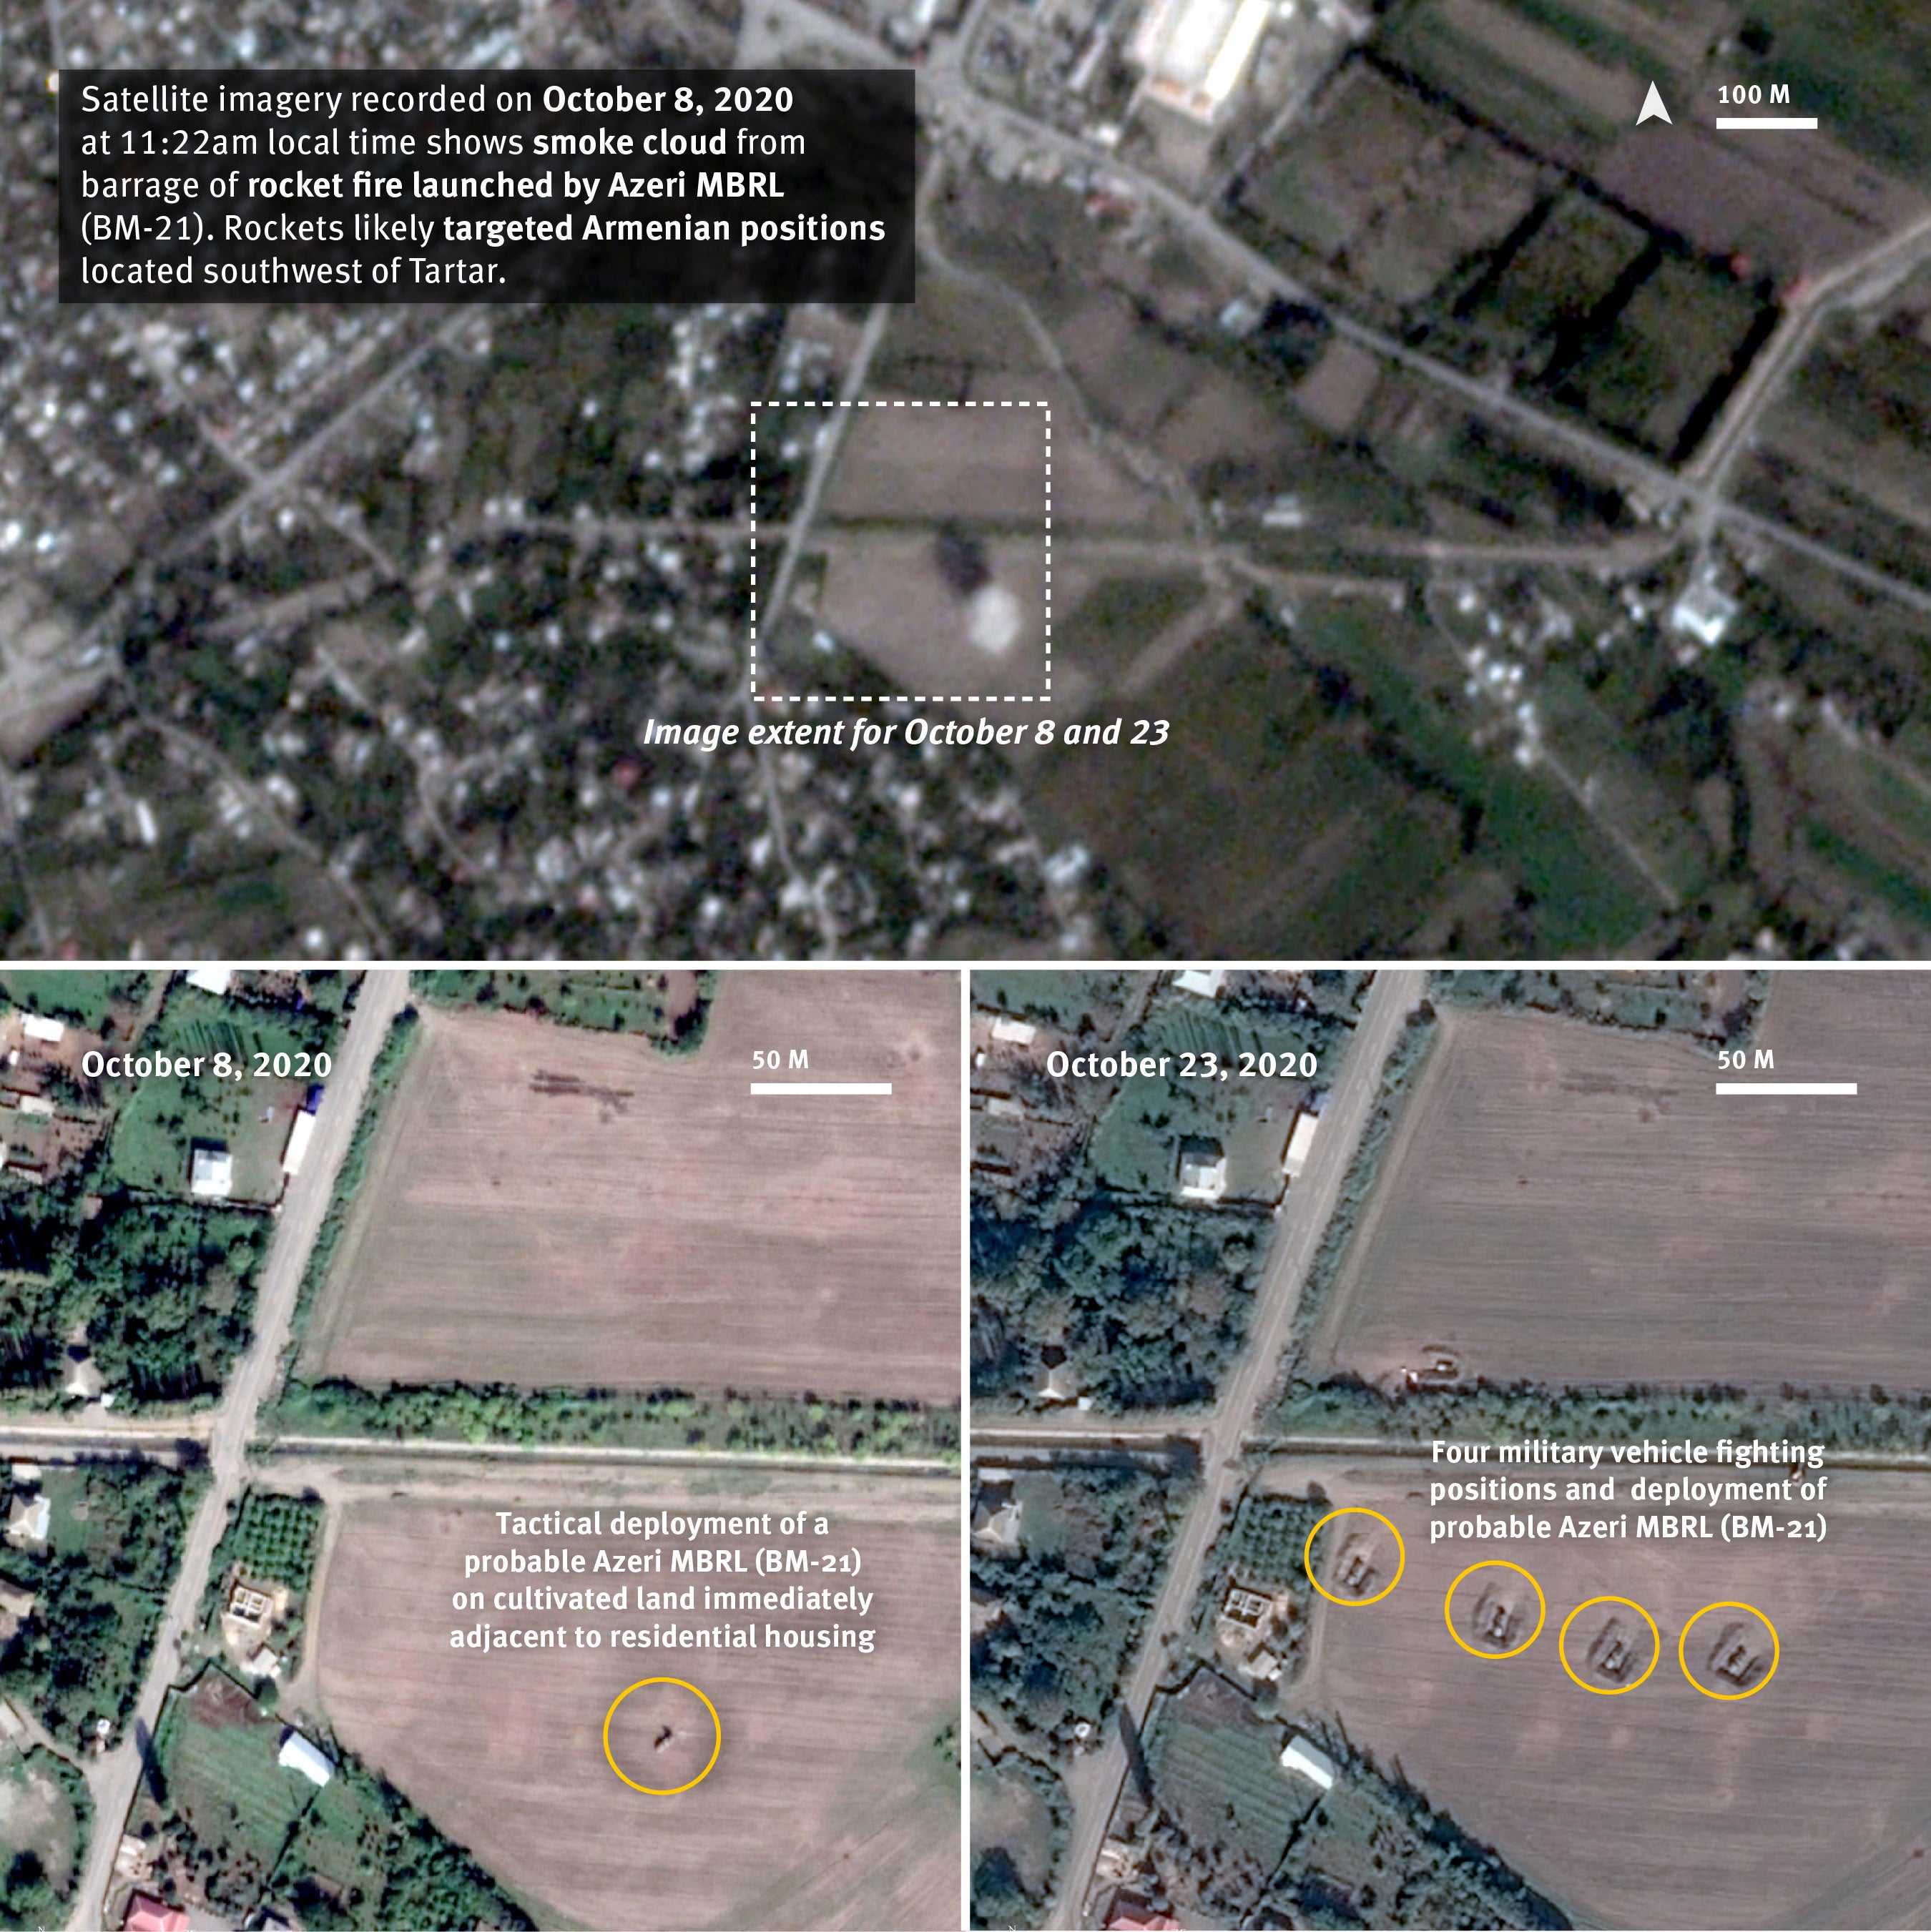 Close-up 2. Satellite imagery recorded on October 8 and 23, 2020 shows new tactical deployments on cultivated fields adjacent to residential areas of the cities of Tartar, Shalabad and Duyarli. 